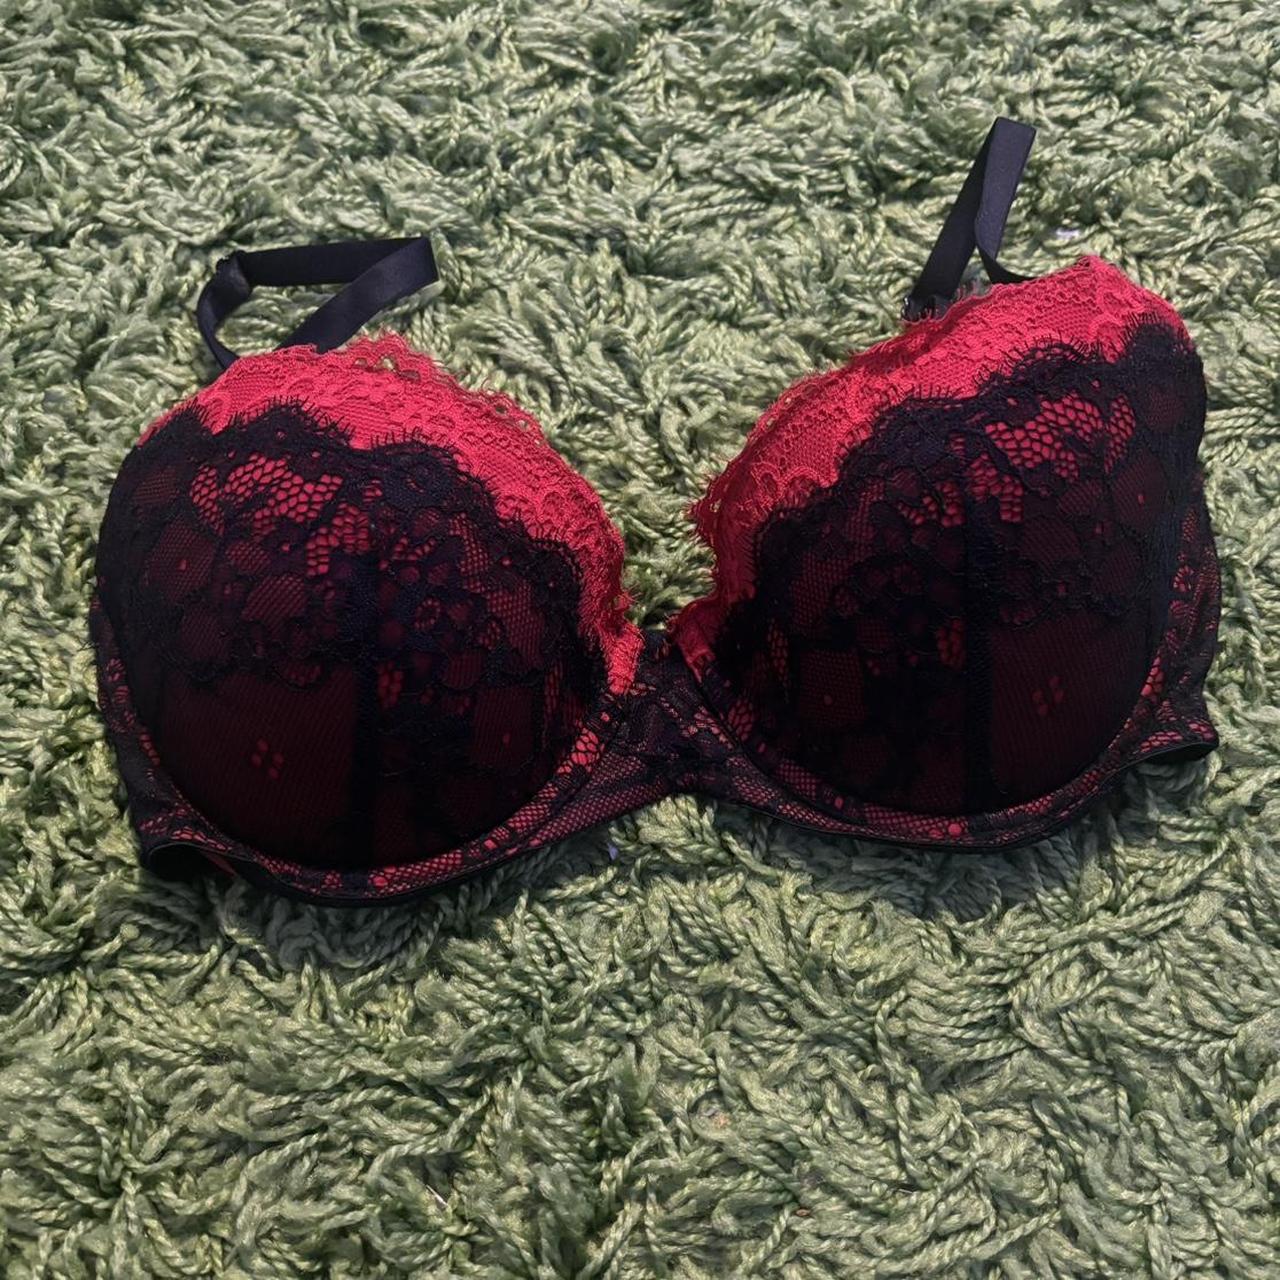 Adored by Adore Me Mesh embroidery bra with Jamilla - Depop